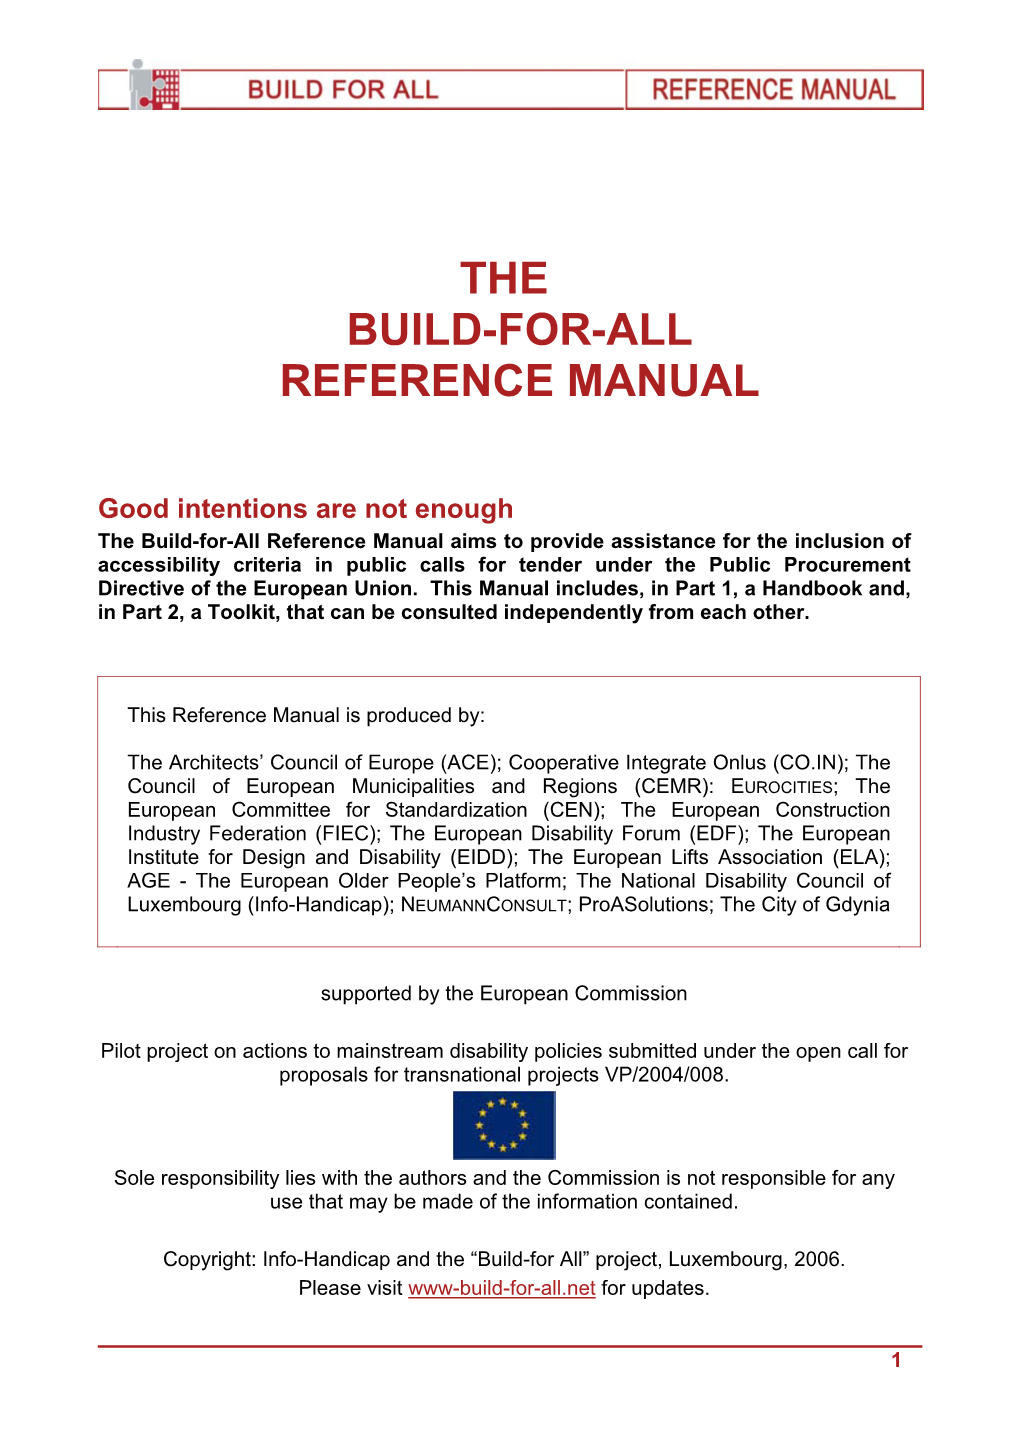 The Build-For-All Reference Manual